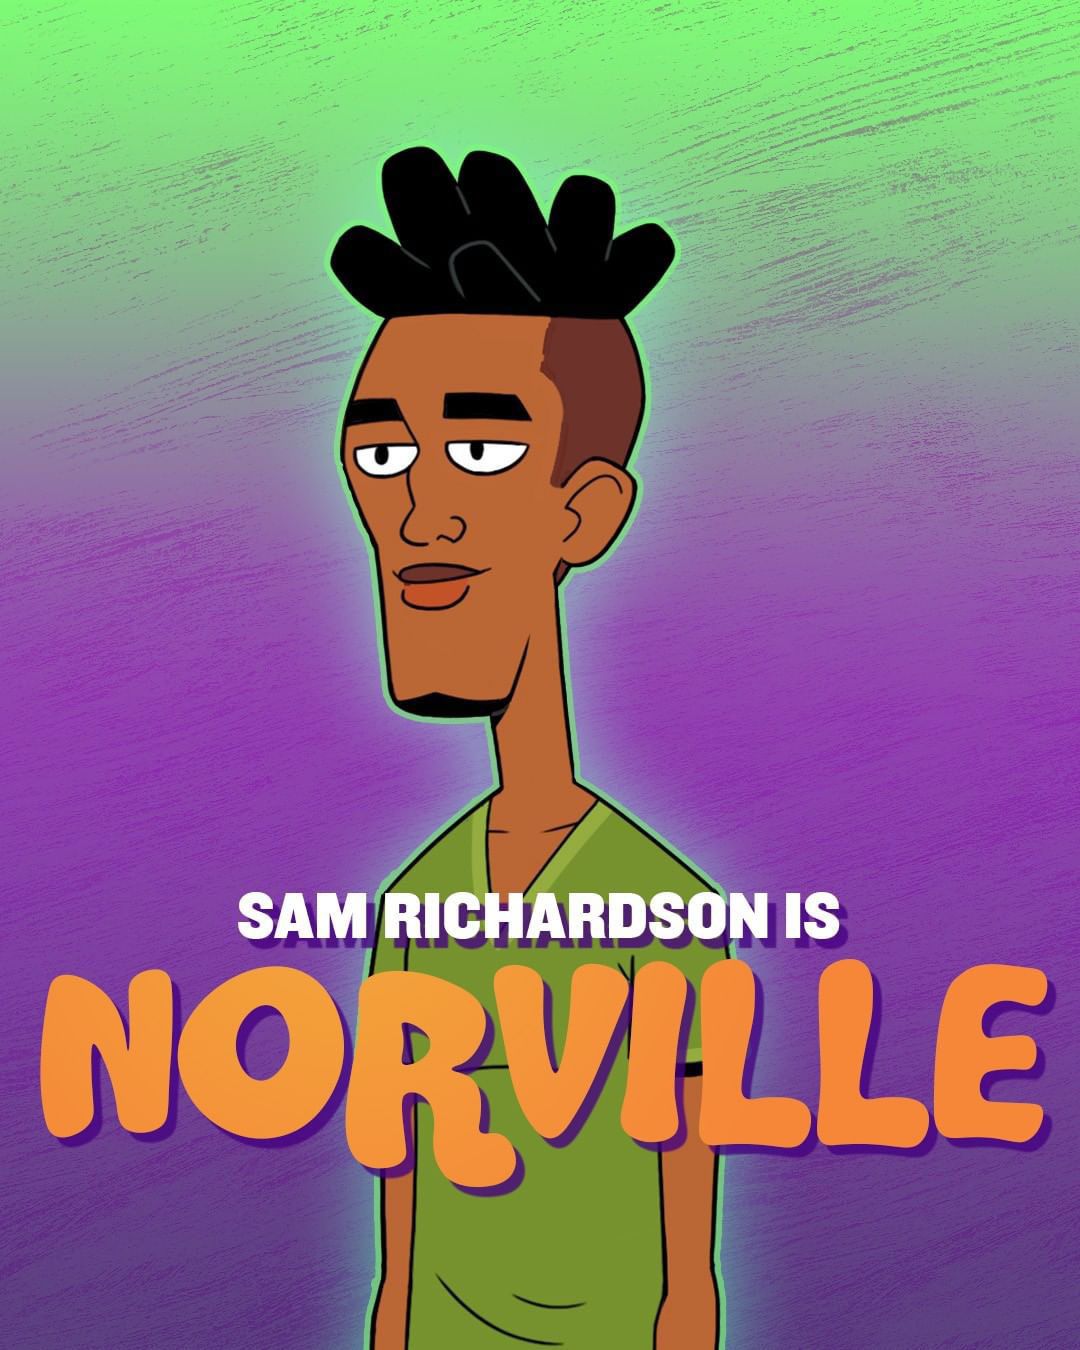 Norville aka Shaggy, a black man with spiky hair and a wimp of soul, dressed in a green shirt 